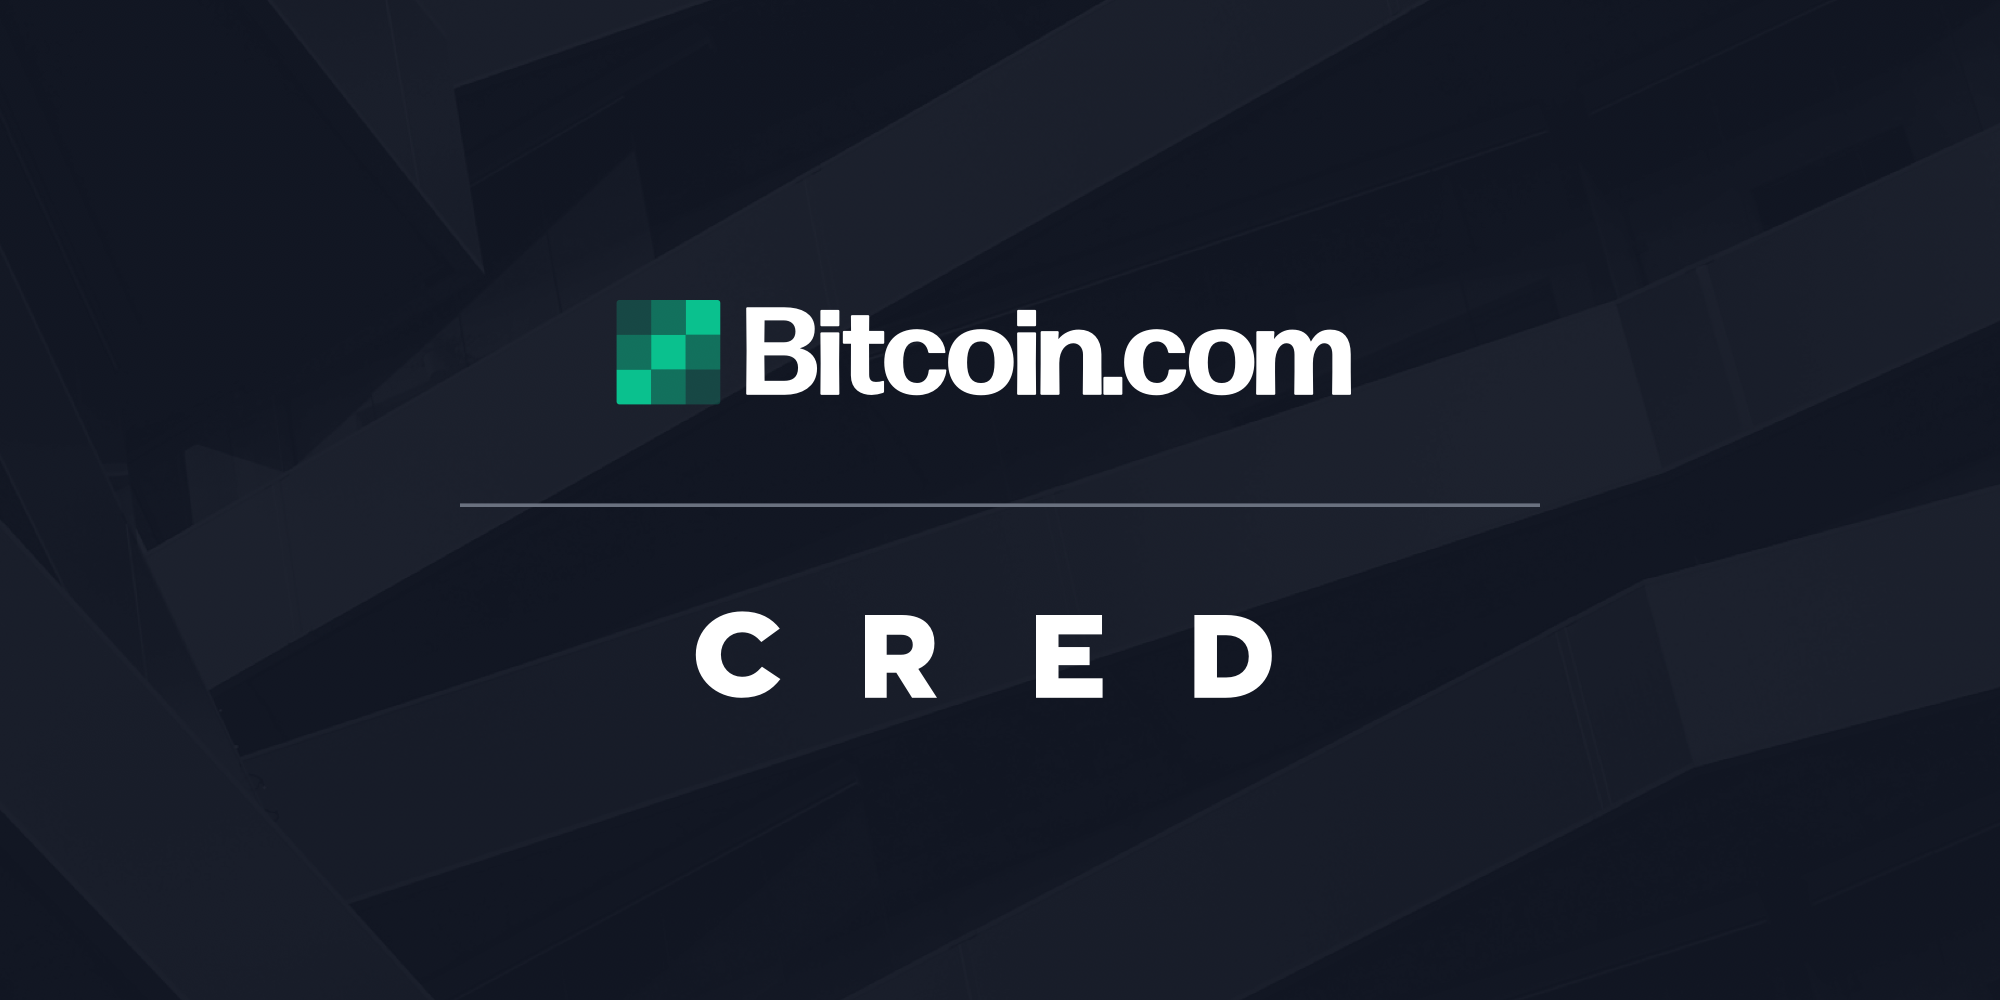 PR: Cred and Bitcoin.com Join Forces to Boost Crypto Lending